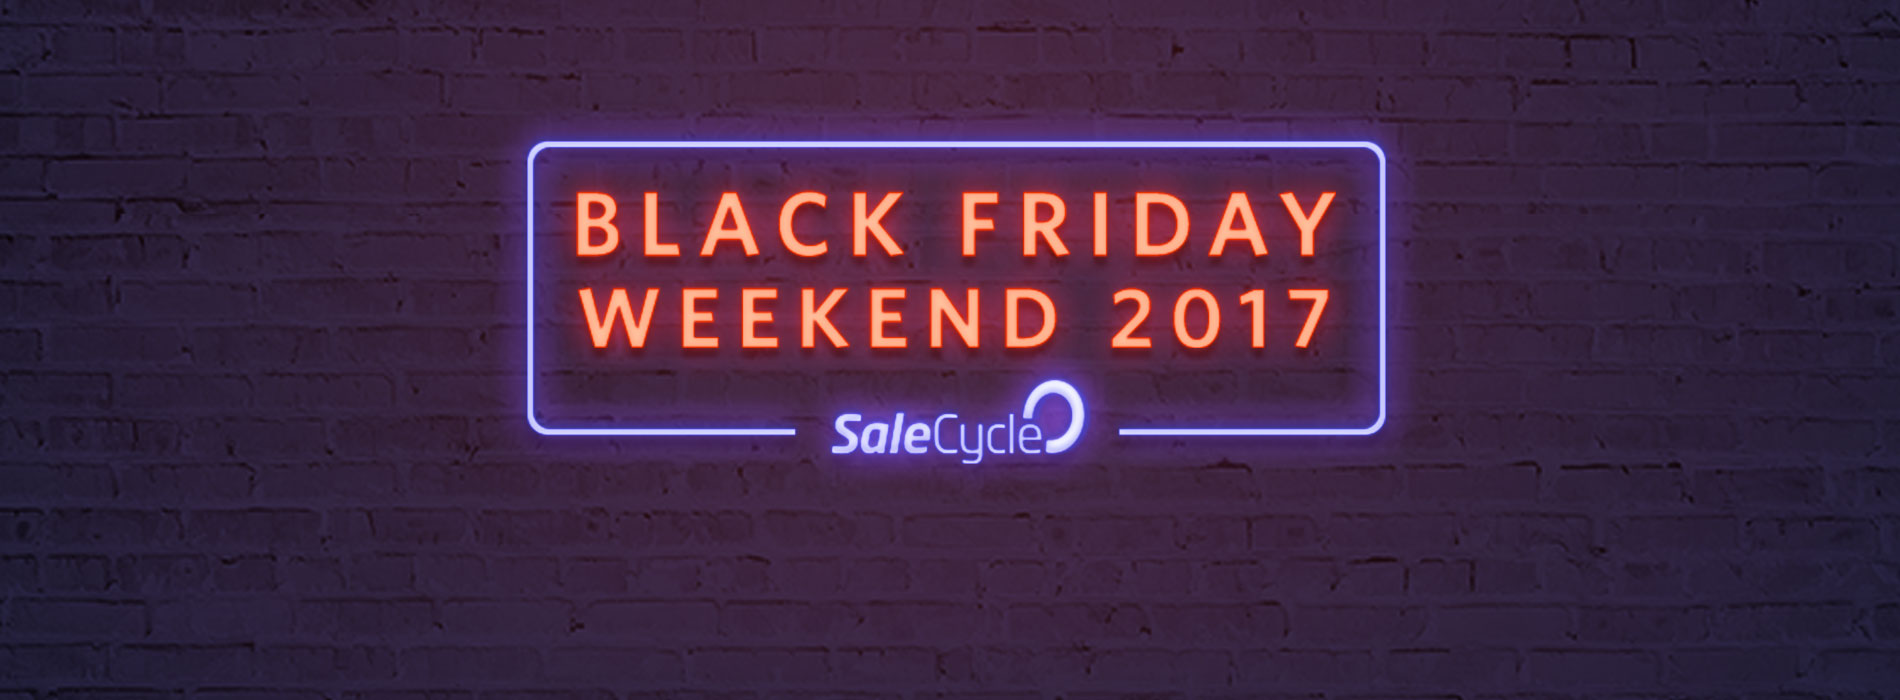 [Infographic] Black Friday Weekend 2017 Stats